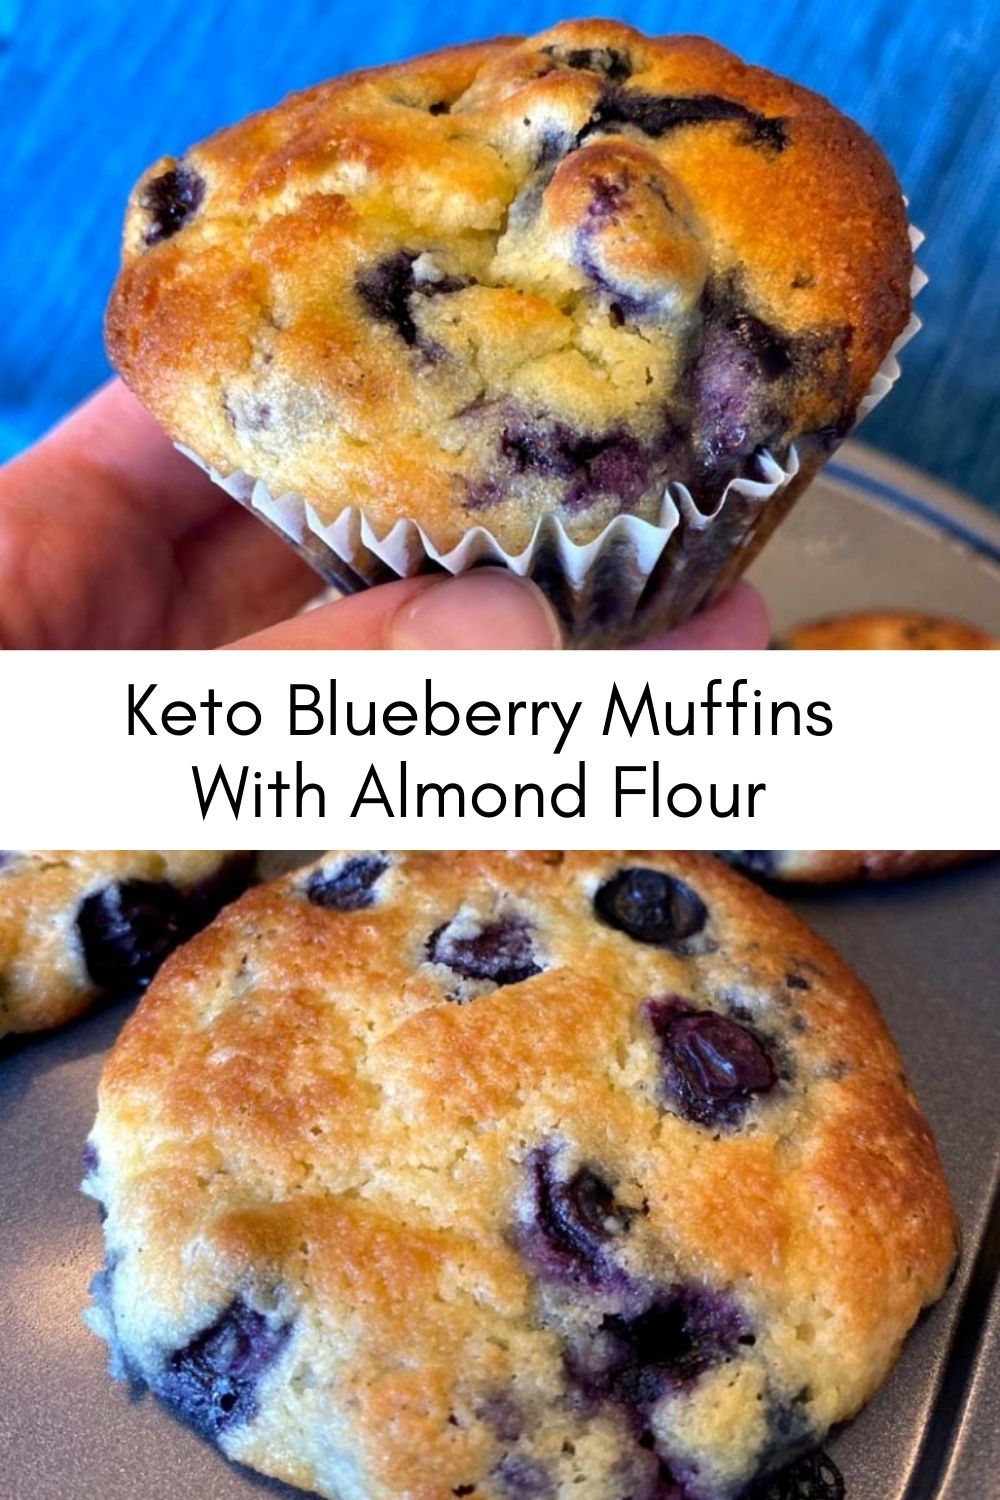 Keto Blueberry Muffins With Almond Flour - yanny bakes